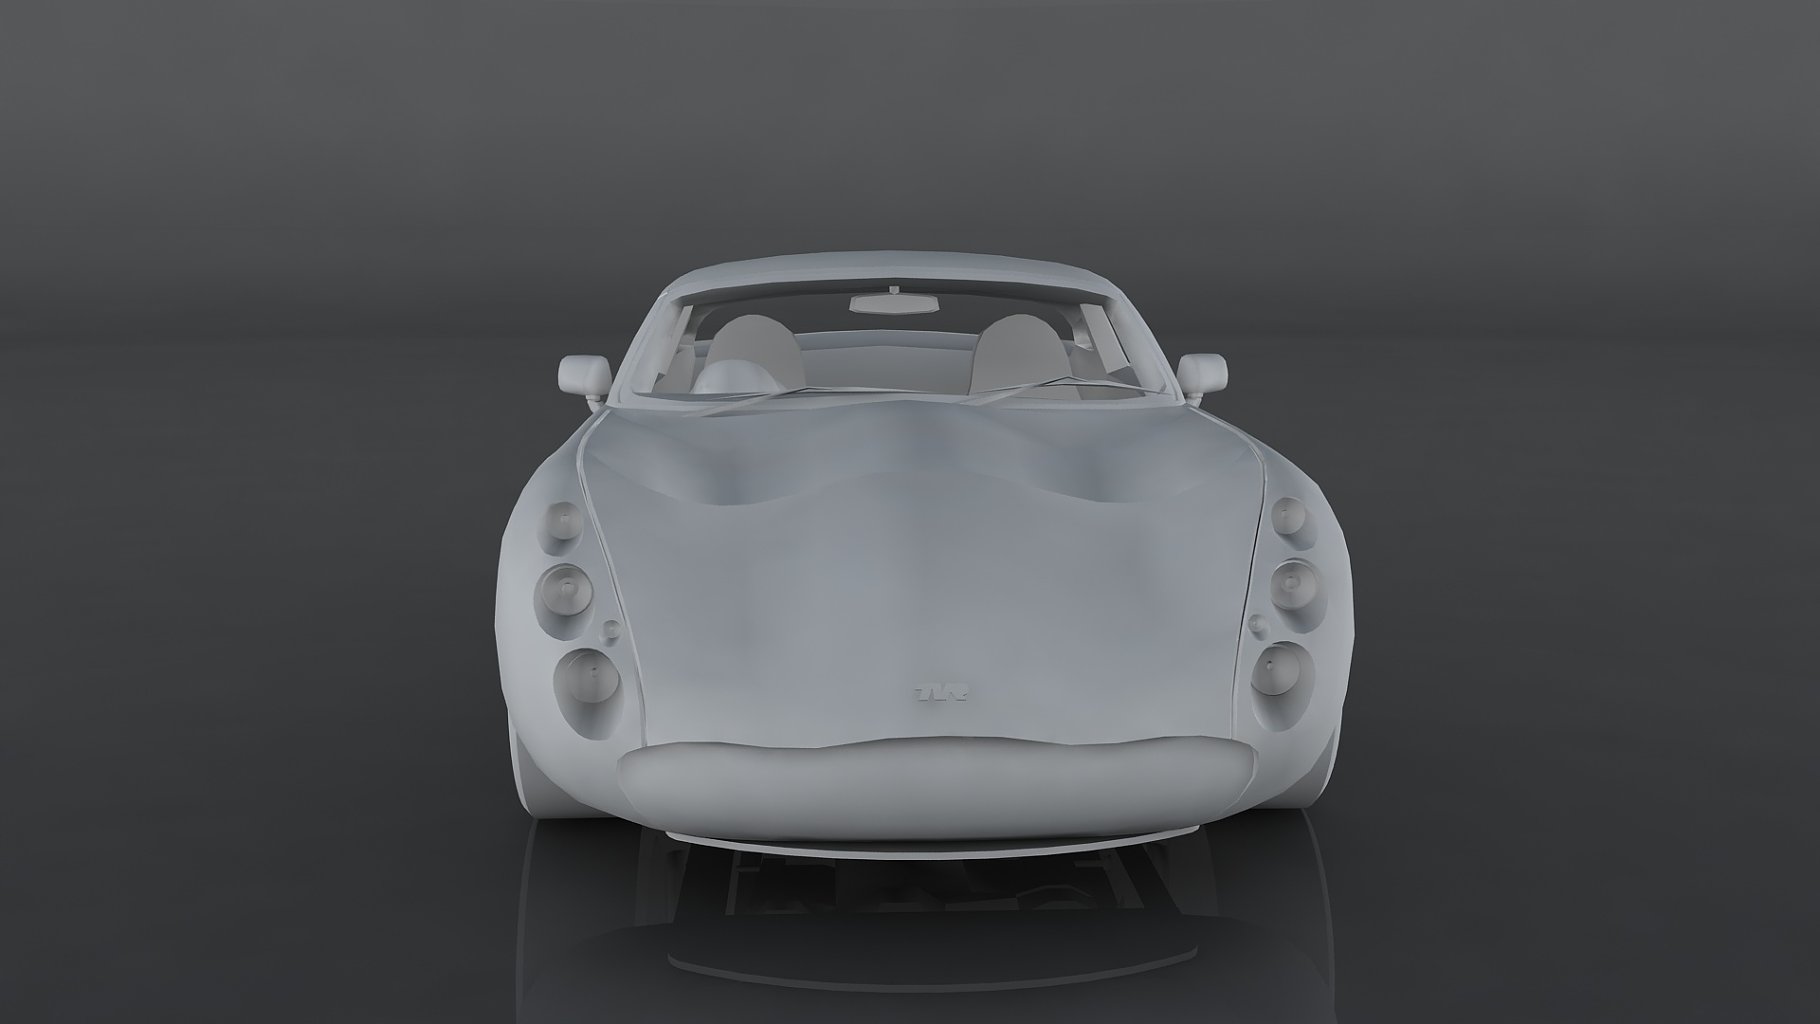 Gray front mockup of 2001 tvr tuscan s on a dark gray background.